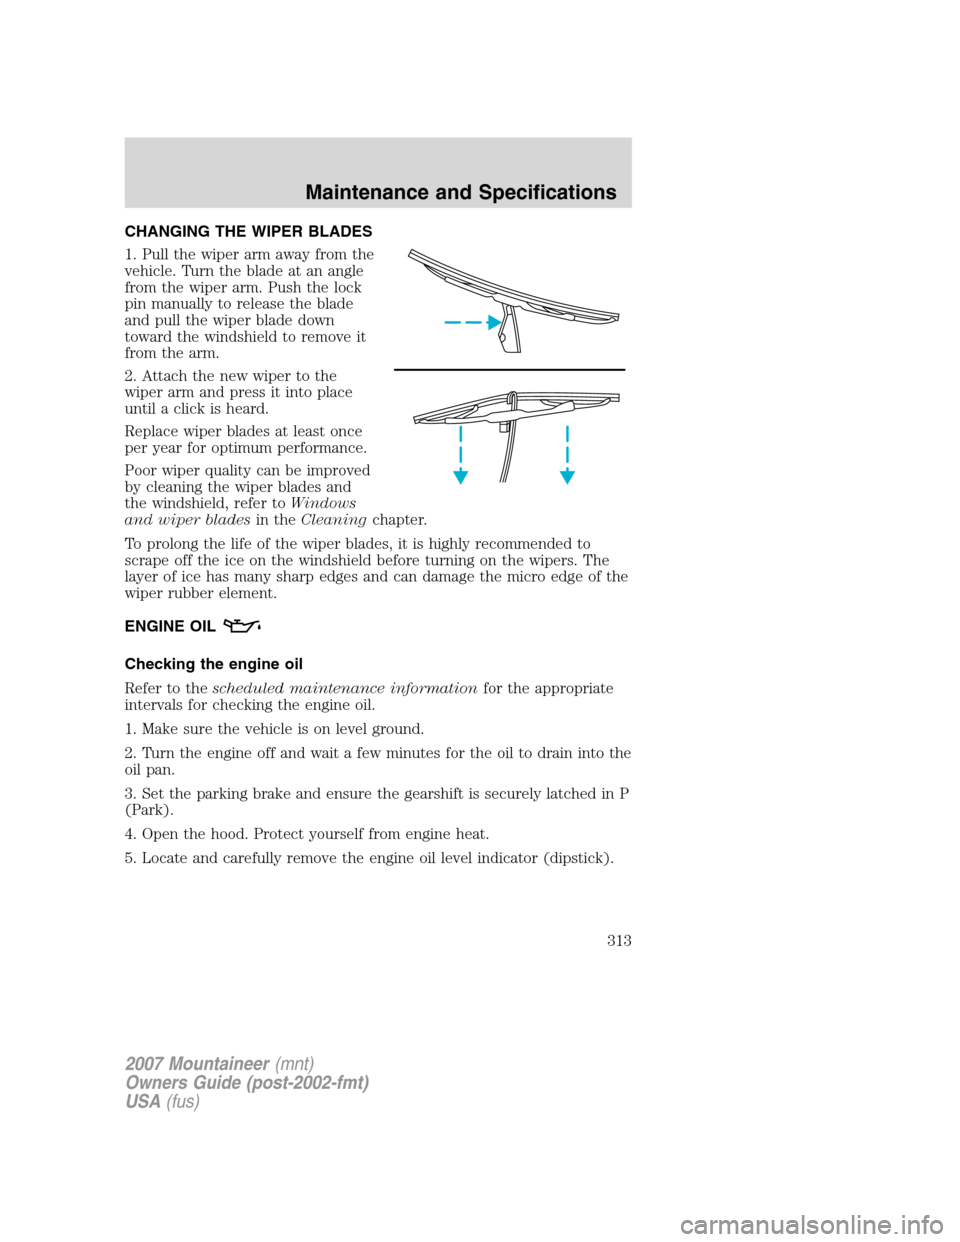 Mercury Mountaineer 2007  Owners Manuals CHANGING THE WIPER BLADES
1. Pull the wiper arm away from the
vehicle. Turn the blade at an angle
from the wiper arm. Push the lock
pin manually to release the blade
and pull the wiper blade down
towa